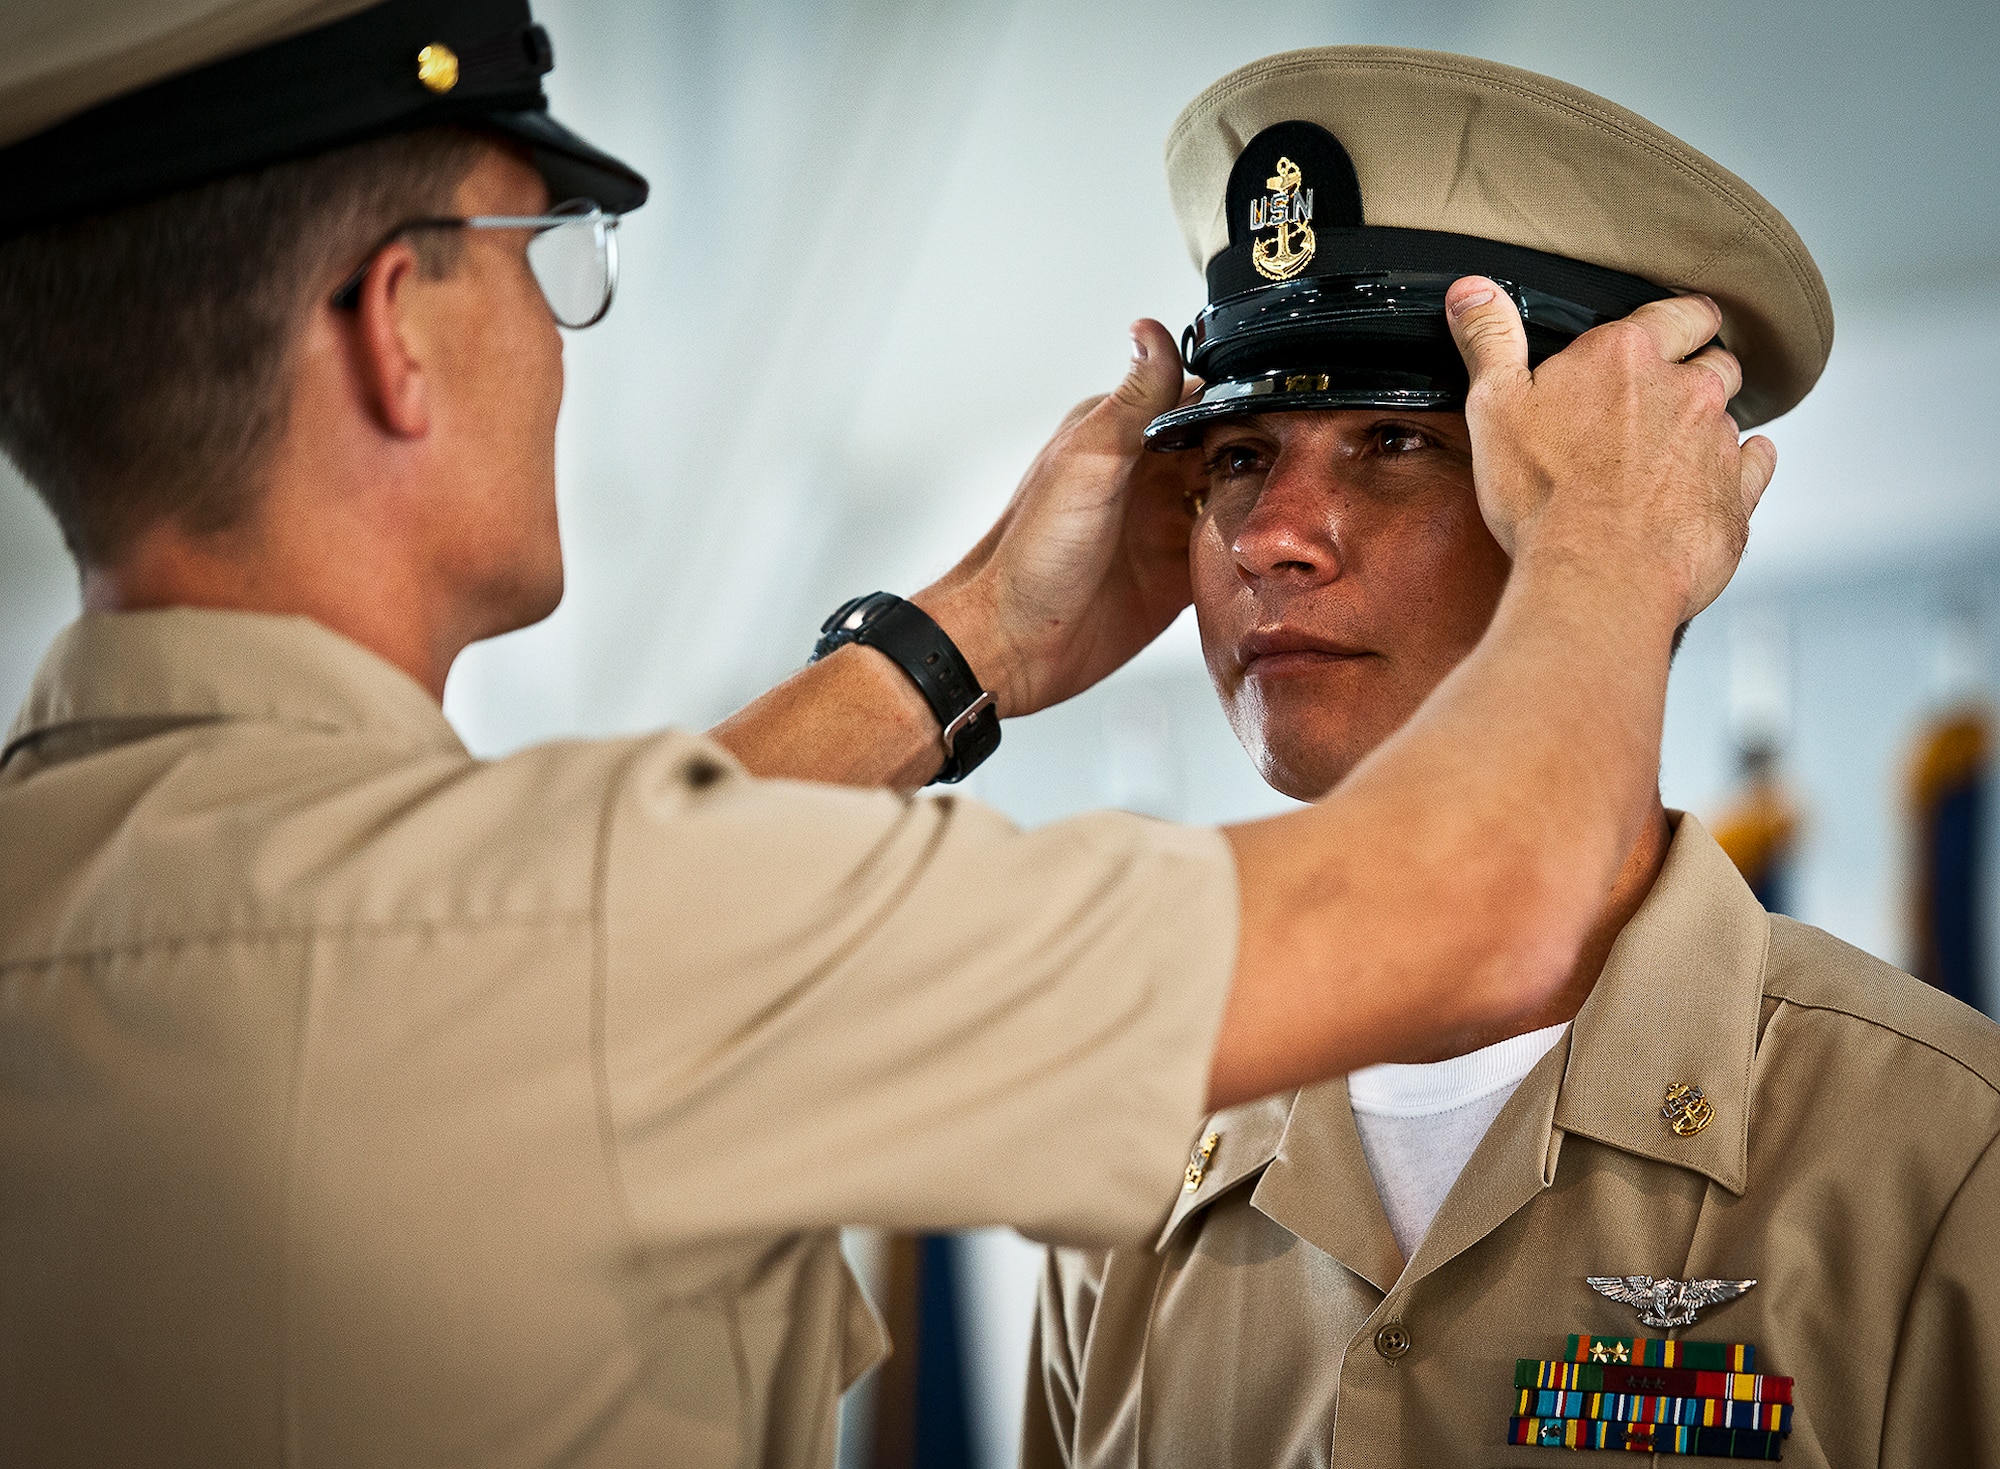 Newly-pinned Chief Petty Officer Roberto Sanchez has his new combination cap set for him by his sponsor during his pinning ceremony held by the Navy's F-35 Lightning II squadron, VFA-101, Sept. 14 at Eglin Air Force Base, Fla.  The ceremony formally marks the transition from E-6 to chief.  A new chief’s sponsor guides him through a six-week induction process. There were four Sailors who pinned on the new rank. A Marine and a Soldier were also pinned as honorary chiefs. (U.S. Air Force photo/Samuel King Jr.)